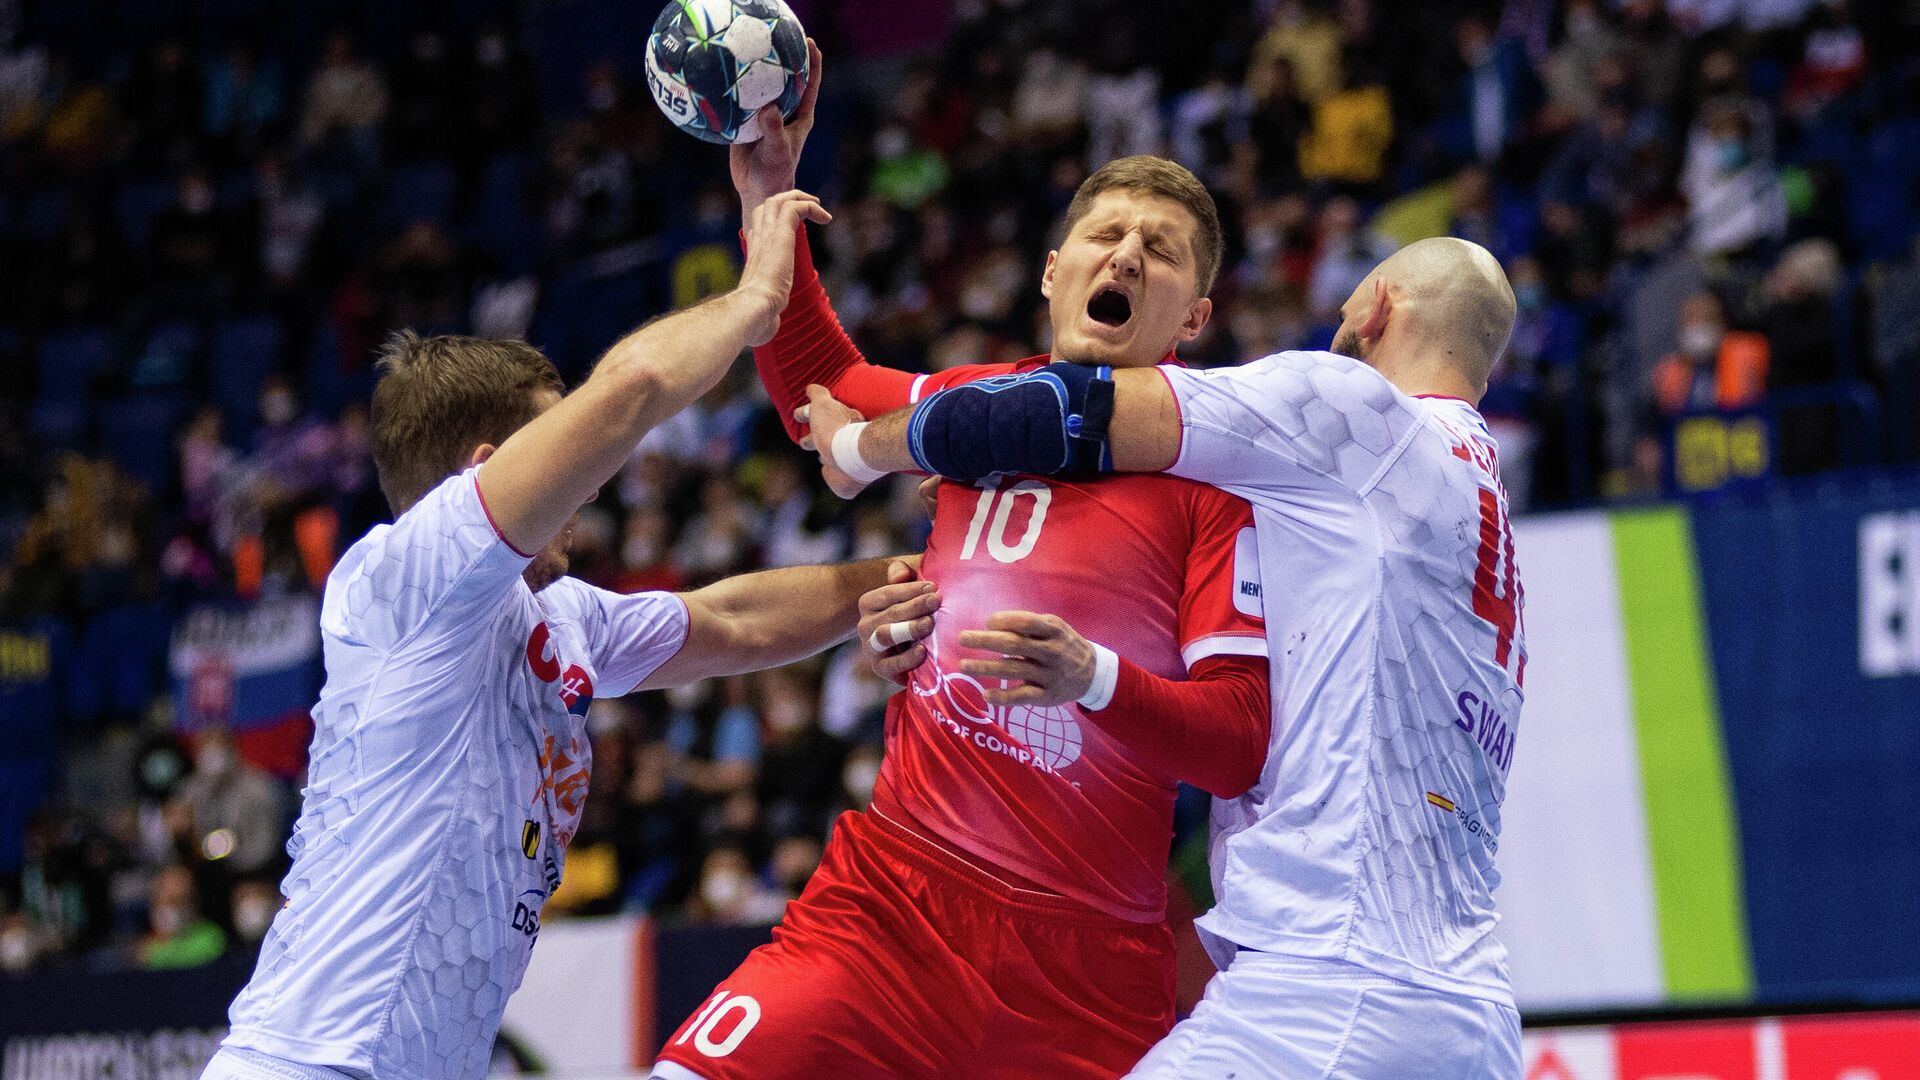 Russia's Valentin Vorobev (C) is blocked during the Men's European Handball Championship preliminary round Group F match between Slovakia and Russia in Kosice, Slovakia on January 17, 2022. (Photo by PETER LAZAR / AFP) - РИА Новости, 1920, 17.01.2022